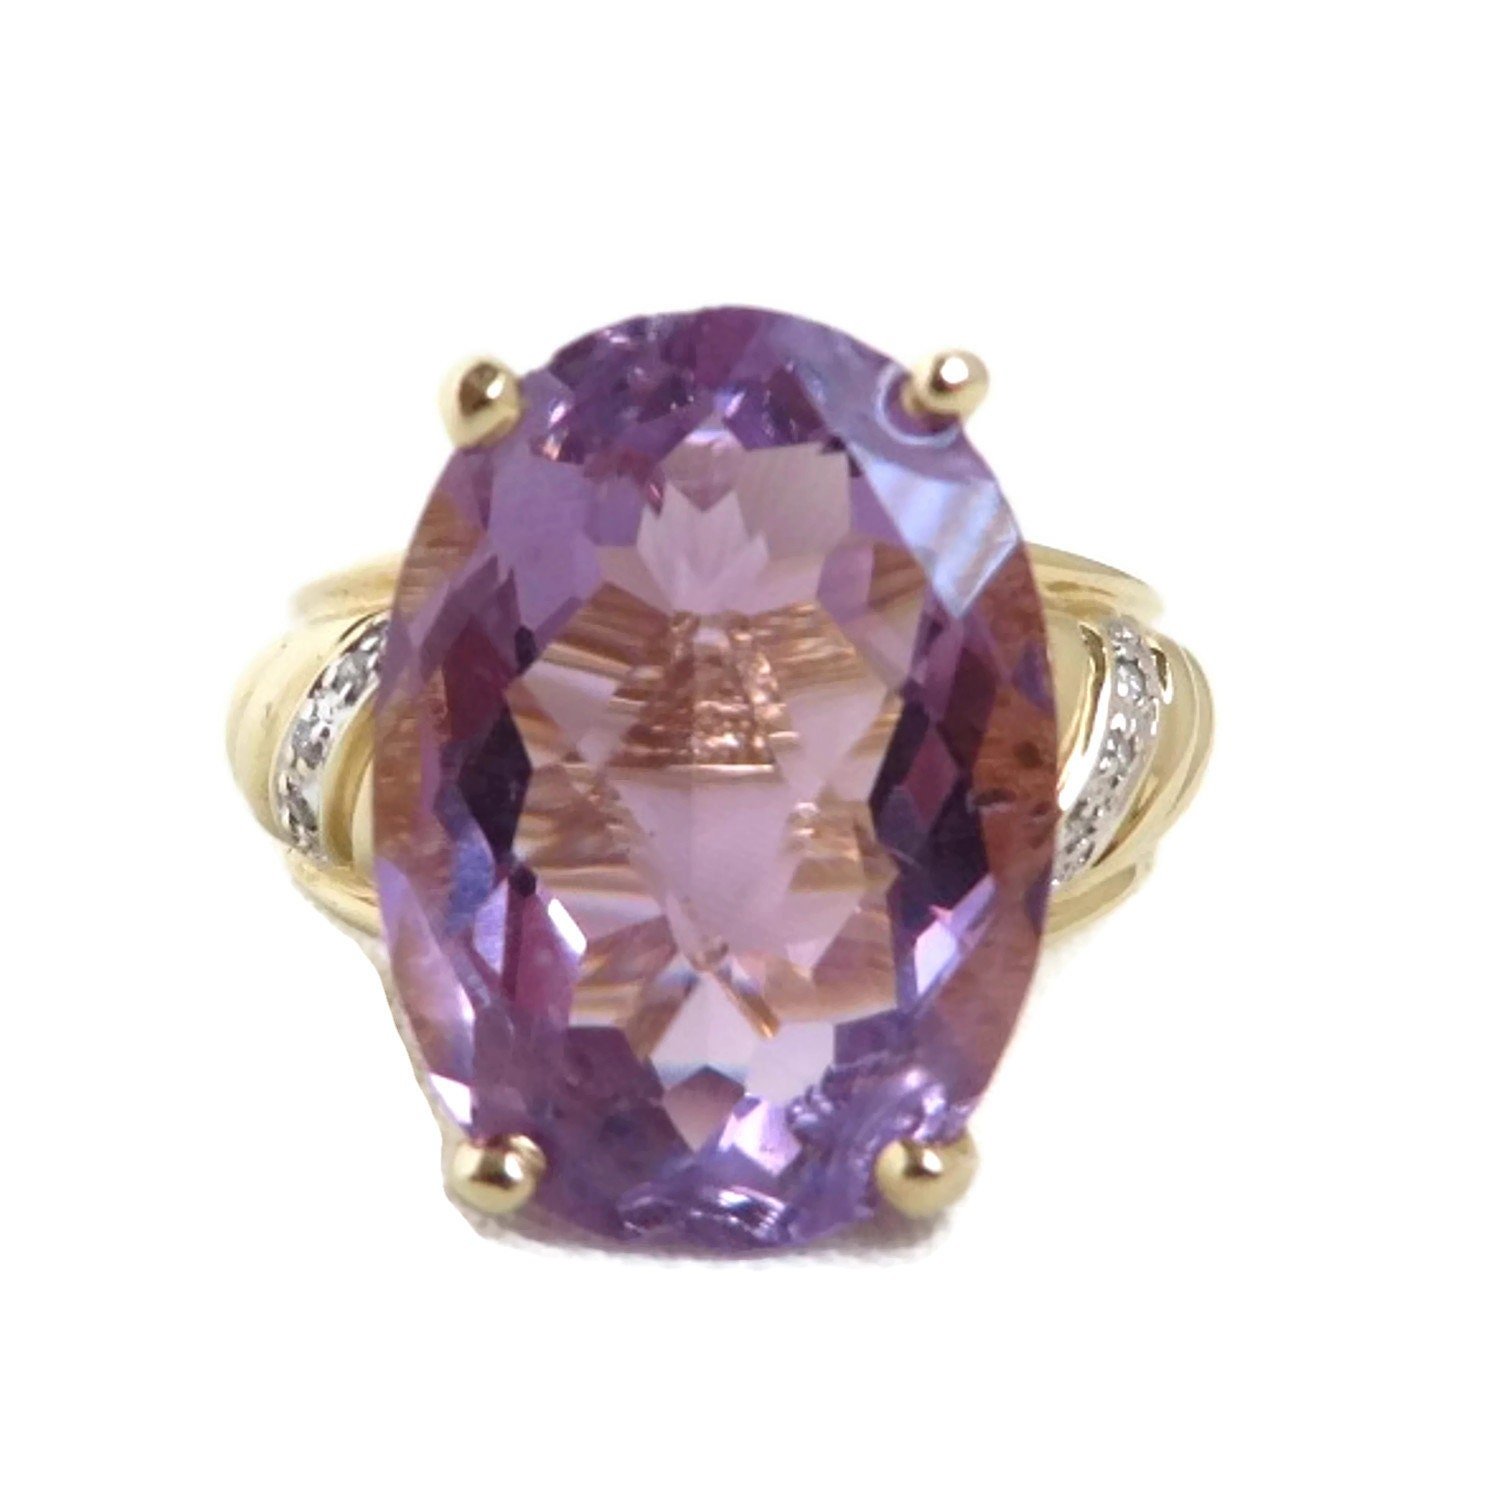 14K Gold Amethyst Engagement Ring, Oval Cut Natural Amethyst with Diamond Accents, 10ctw, Size 7